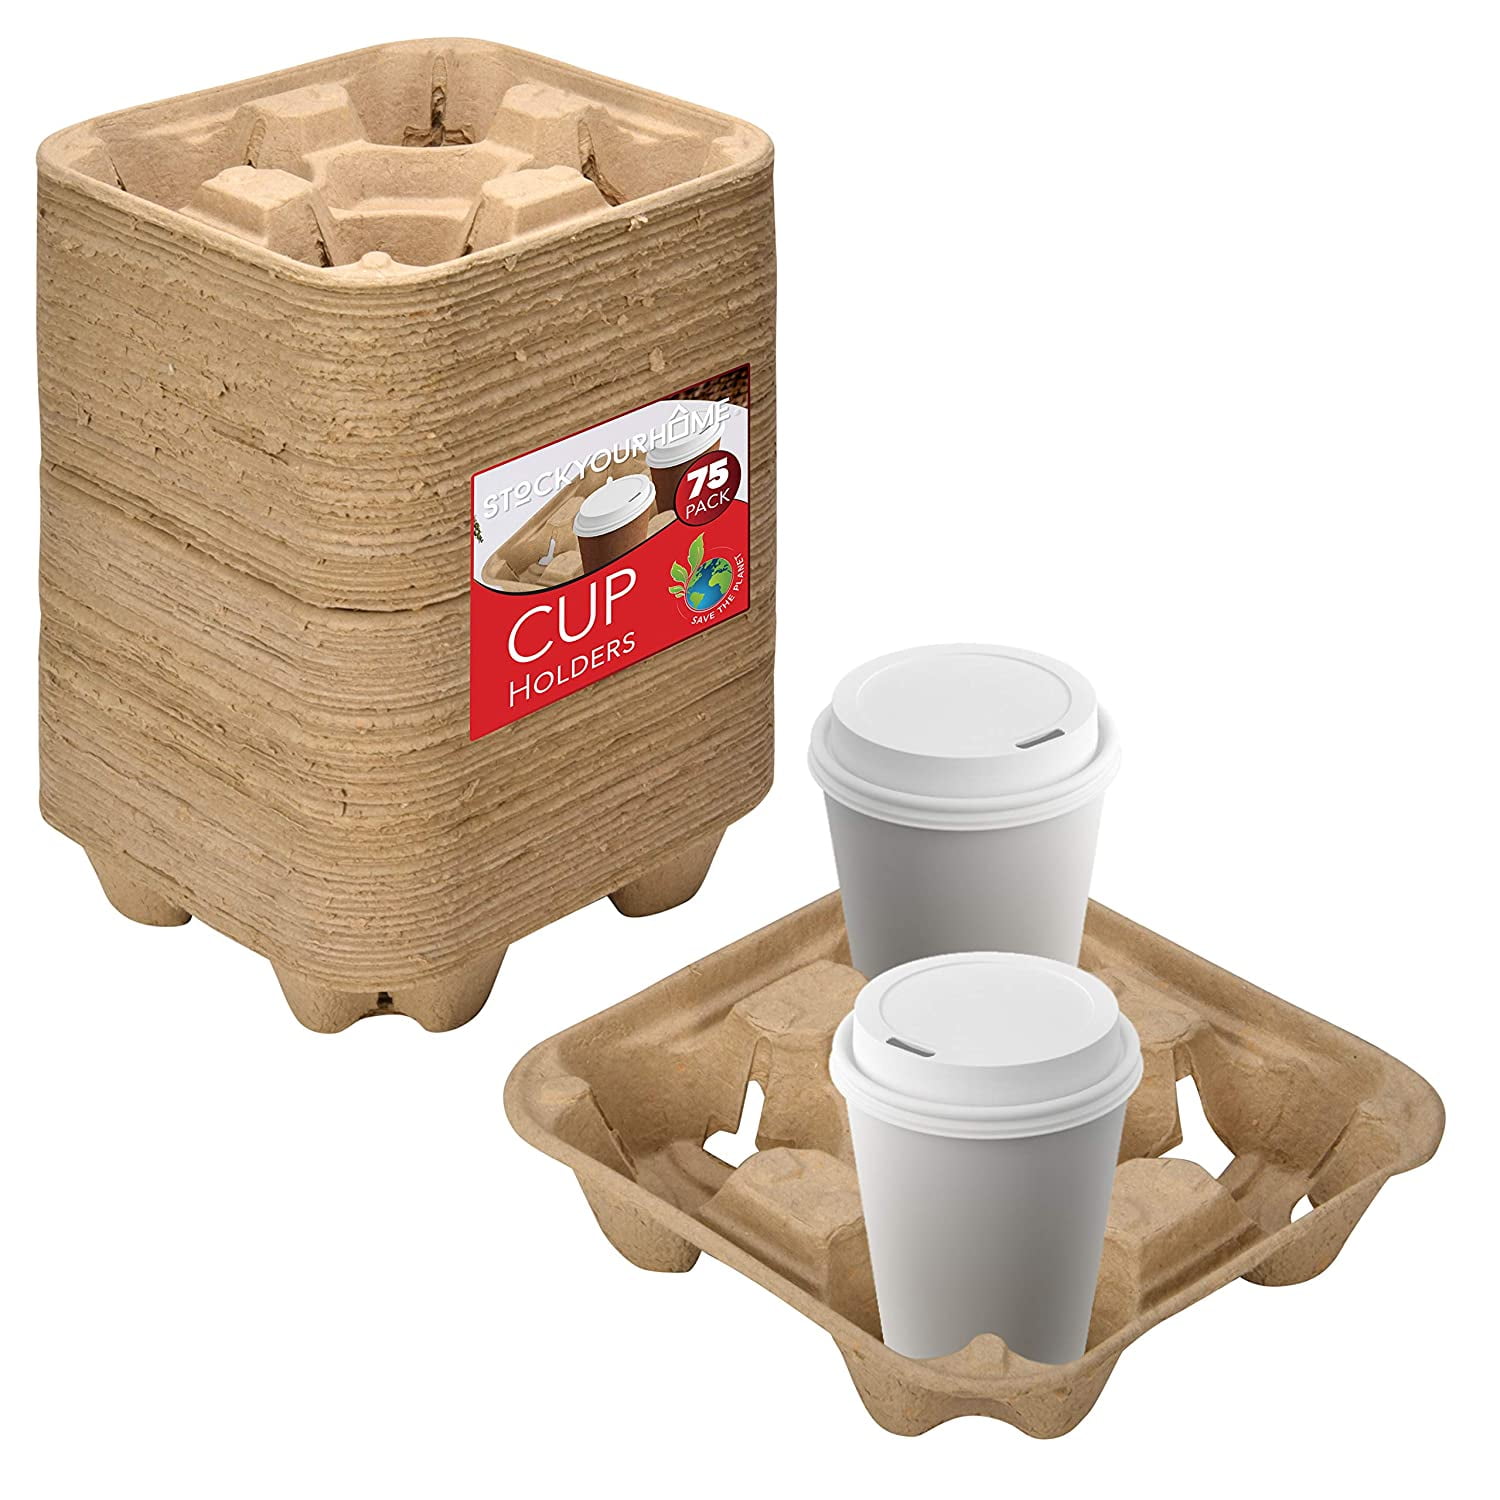 300 600 4 Cup Carry Trays Takeaway Cup Holders Cardboard Per 20,50,100,200 